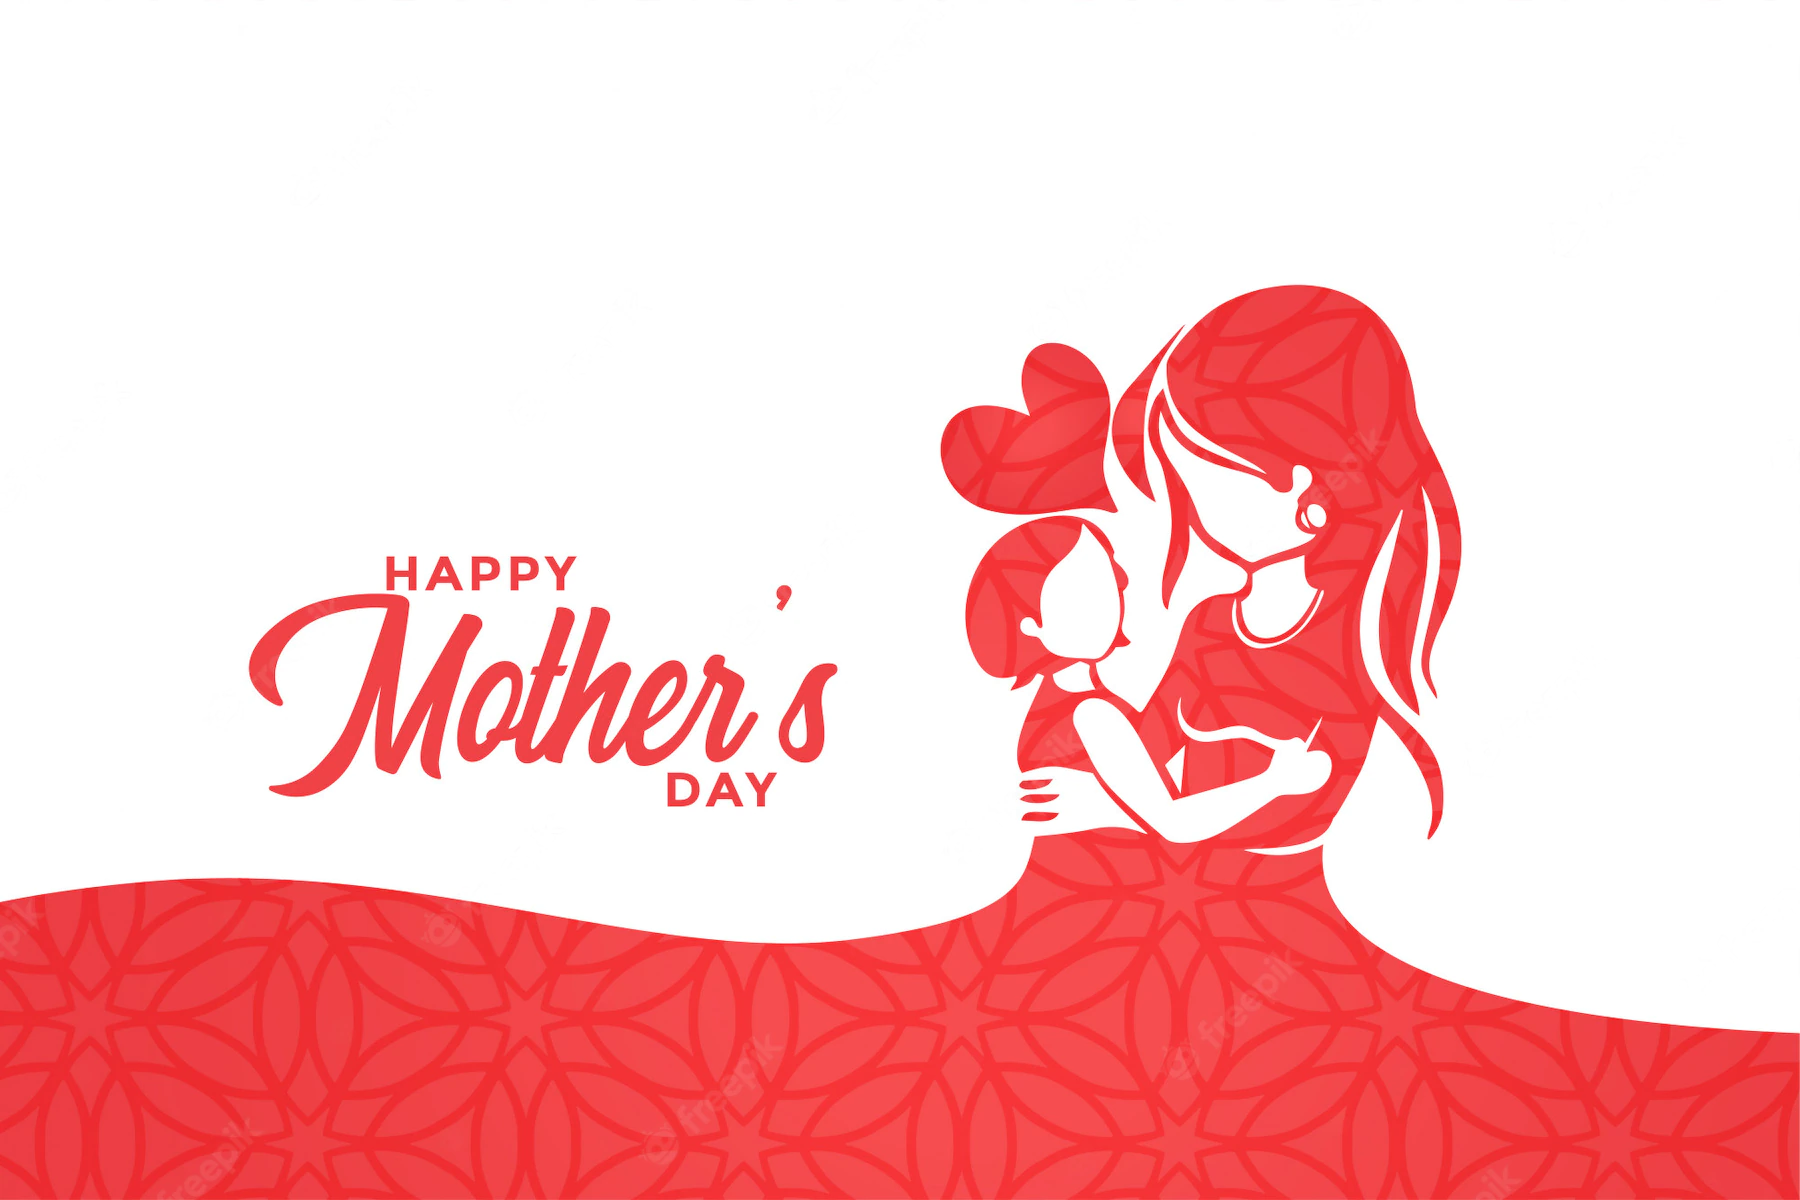 Happy Mothers Day Mom Child Love Greeting Design 1017 25011